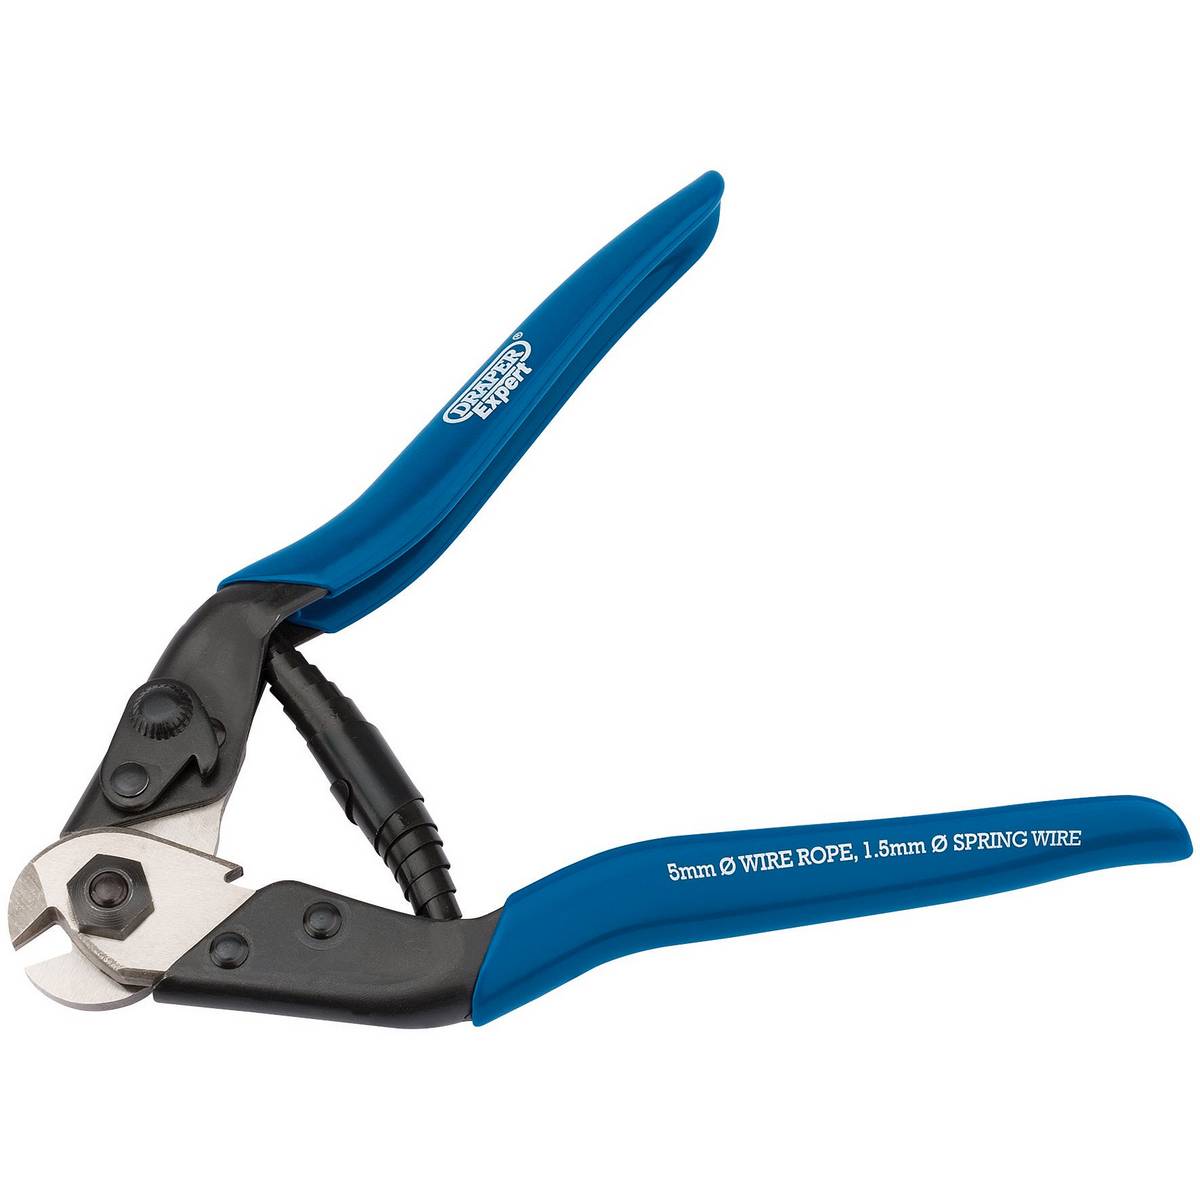 DRAPER WIRE ROPE/SPRING WIRE CUTTER, 190MM